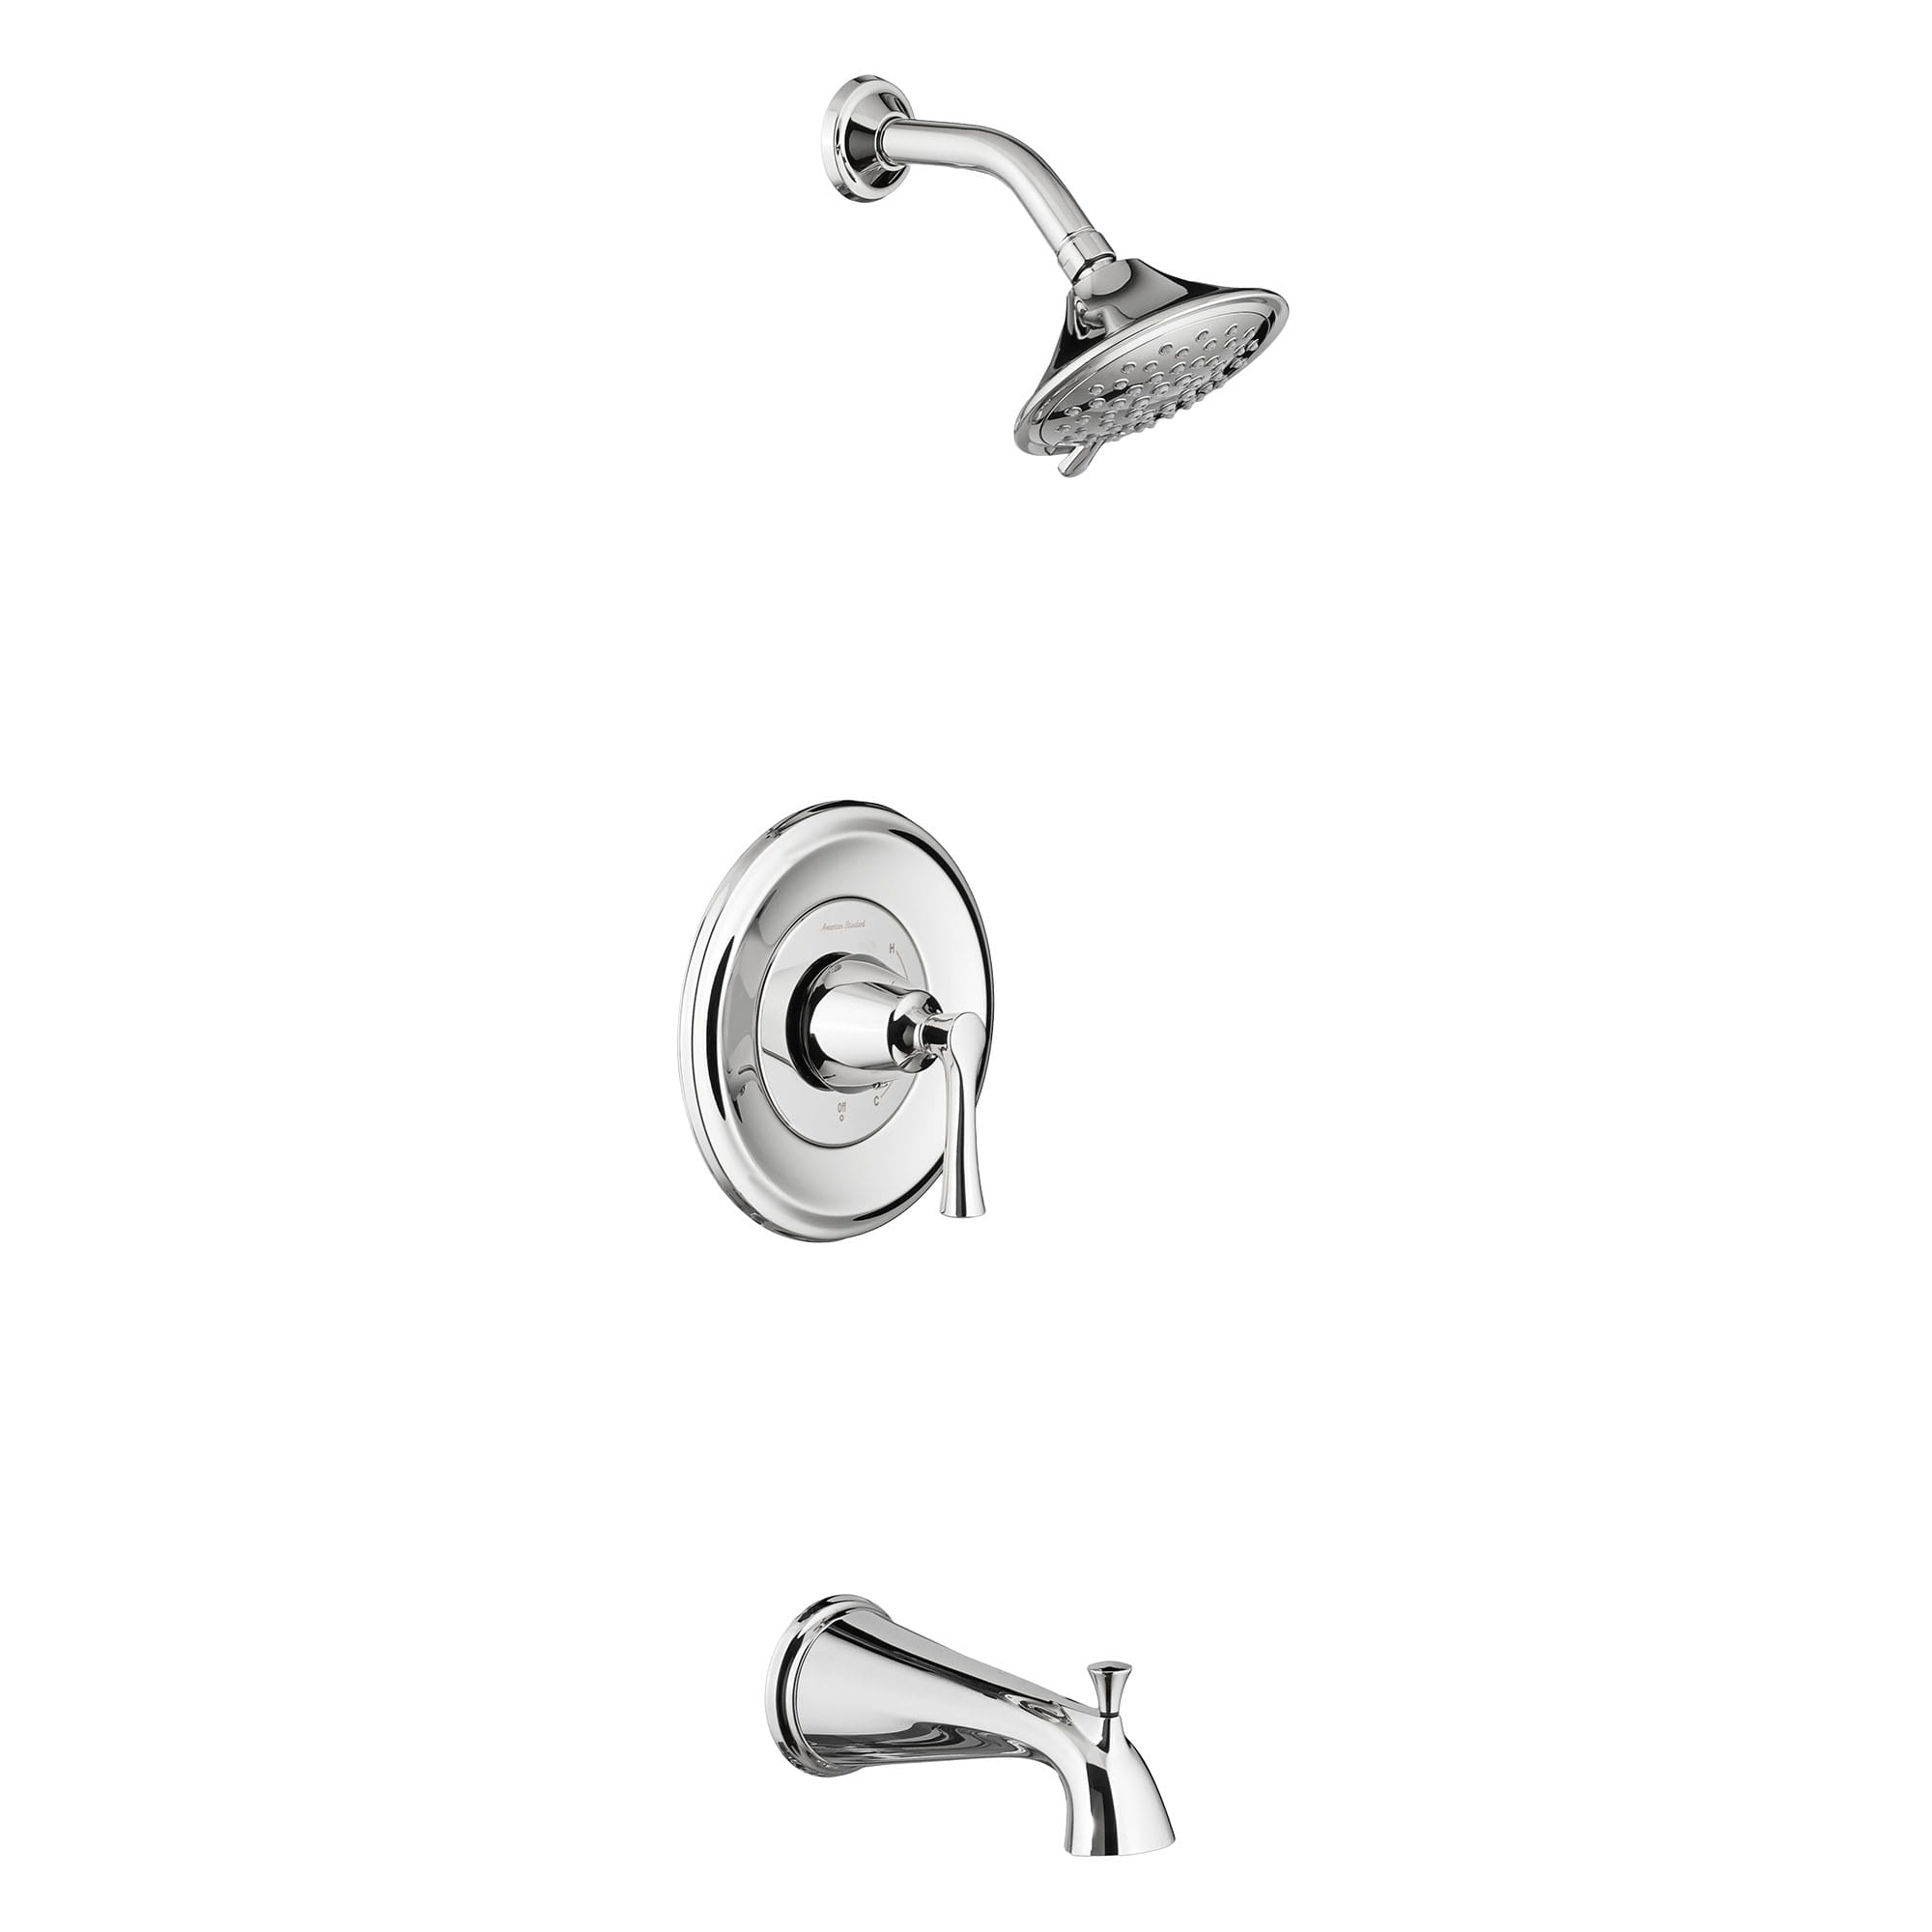 Estate 1.75 GPM Tub and Shower Trim Kit with Water-Saving 3-Function Showerhead and Lever Handle